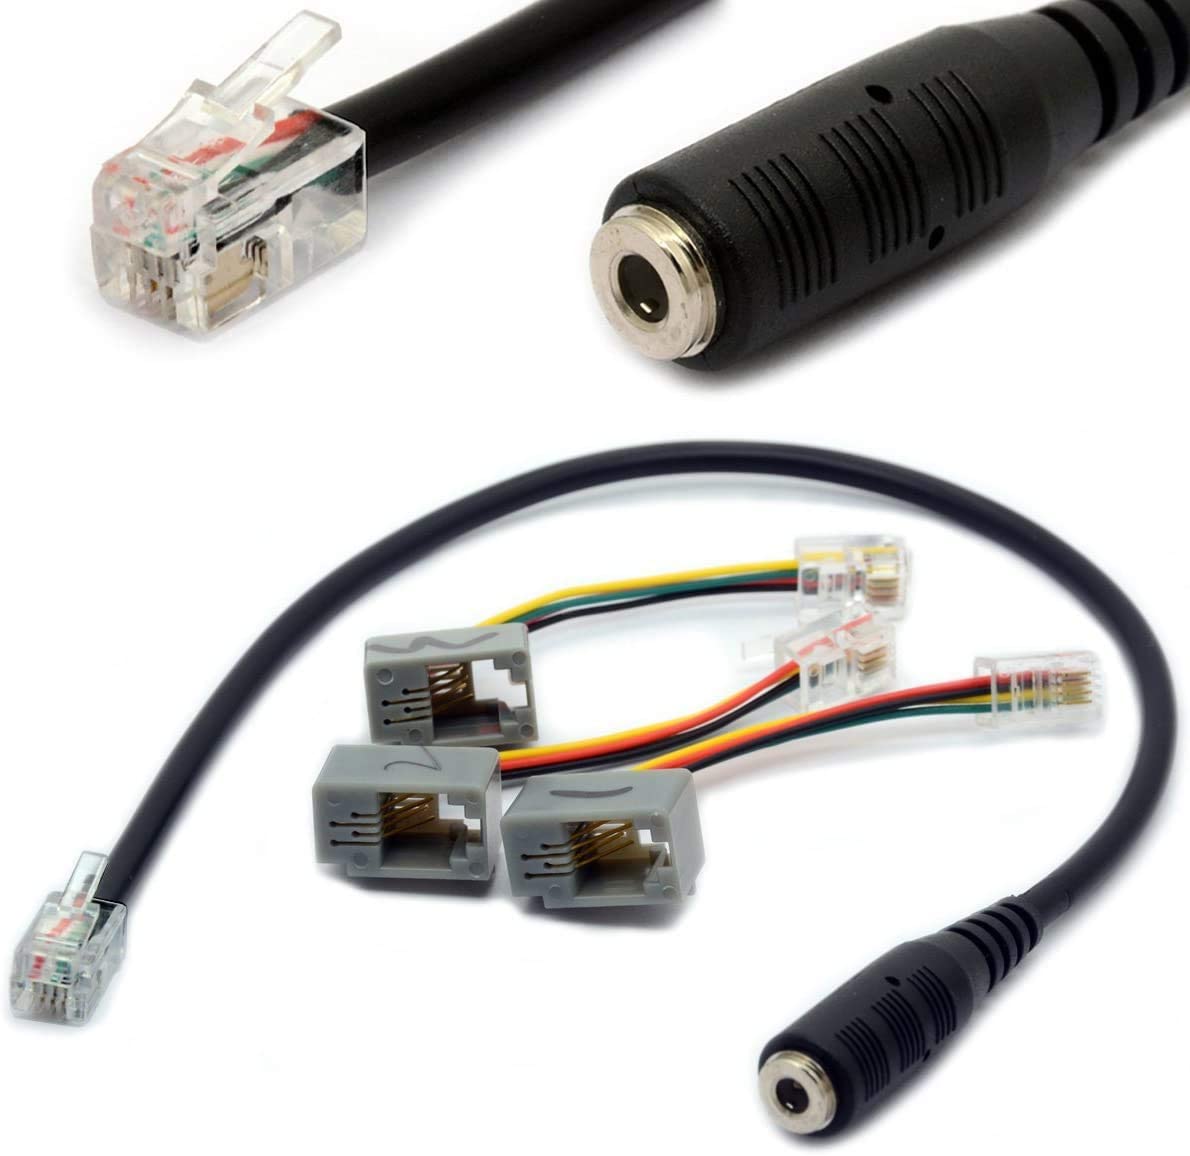 4P4C RJ9/RJ10 to 3.5mm Female Headset Adapter Cable Stereo Converter for Cisco, Plantronics